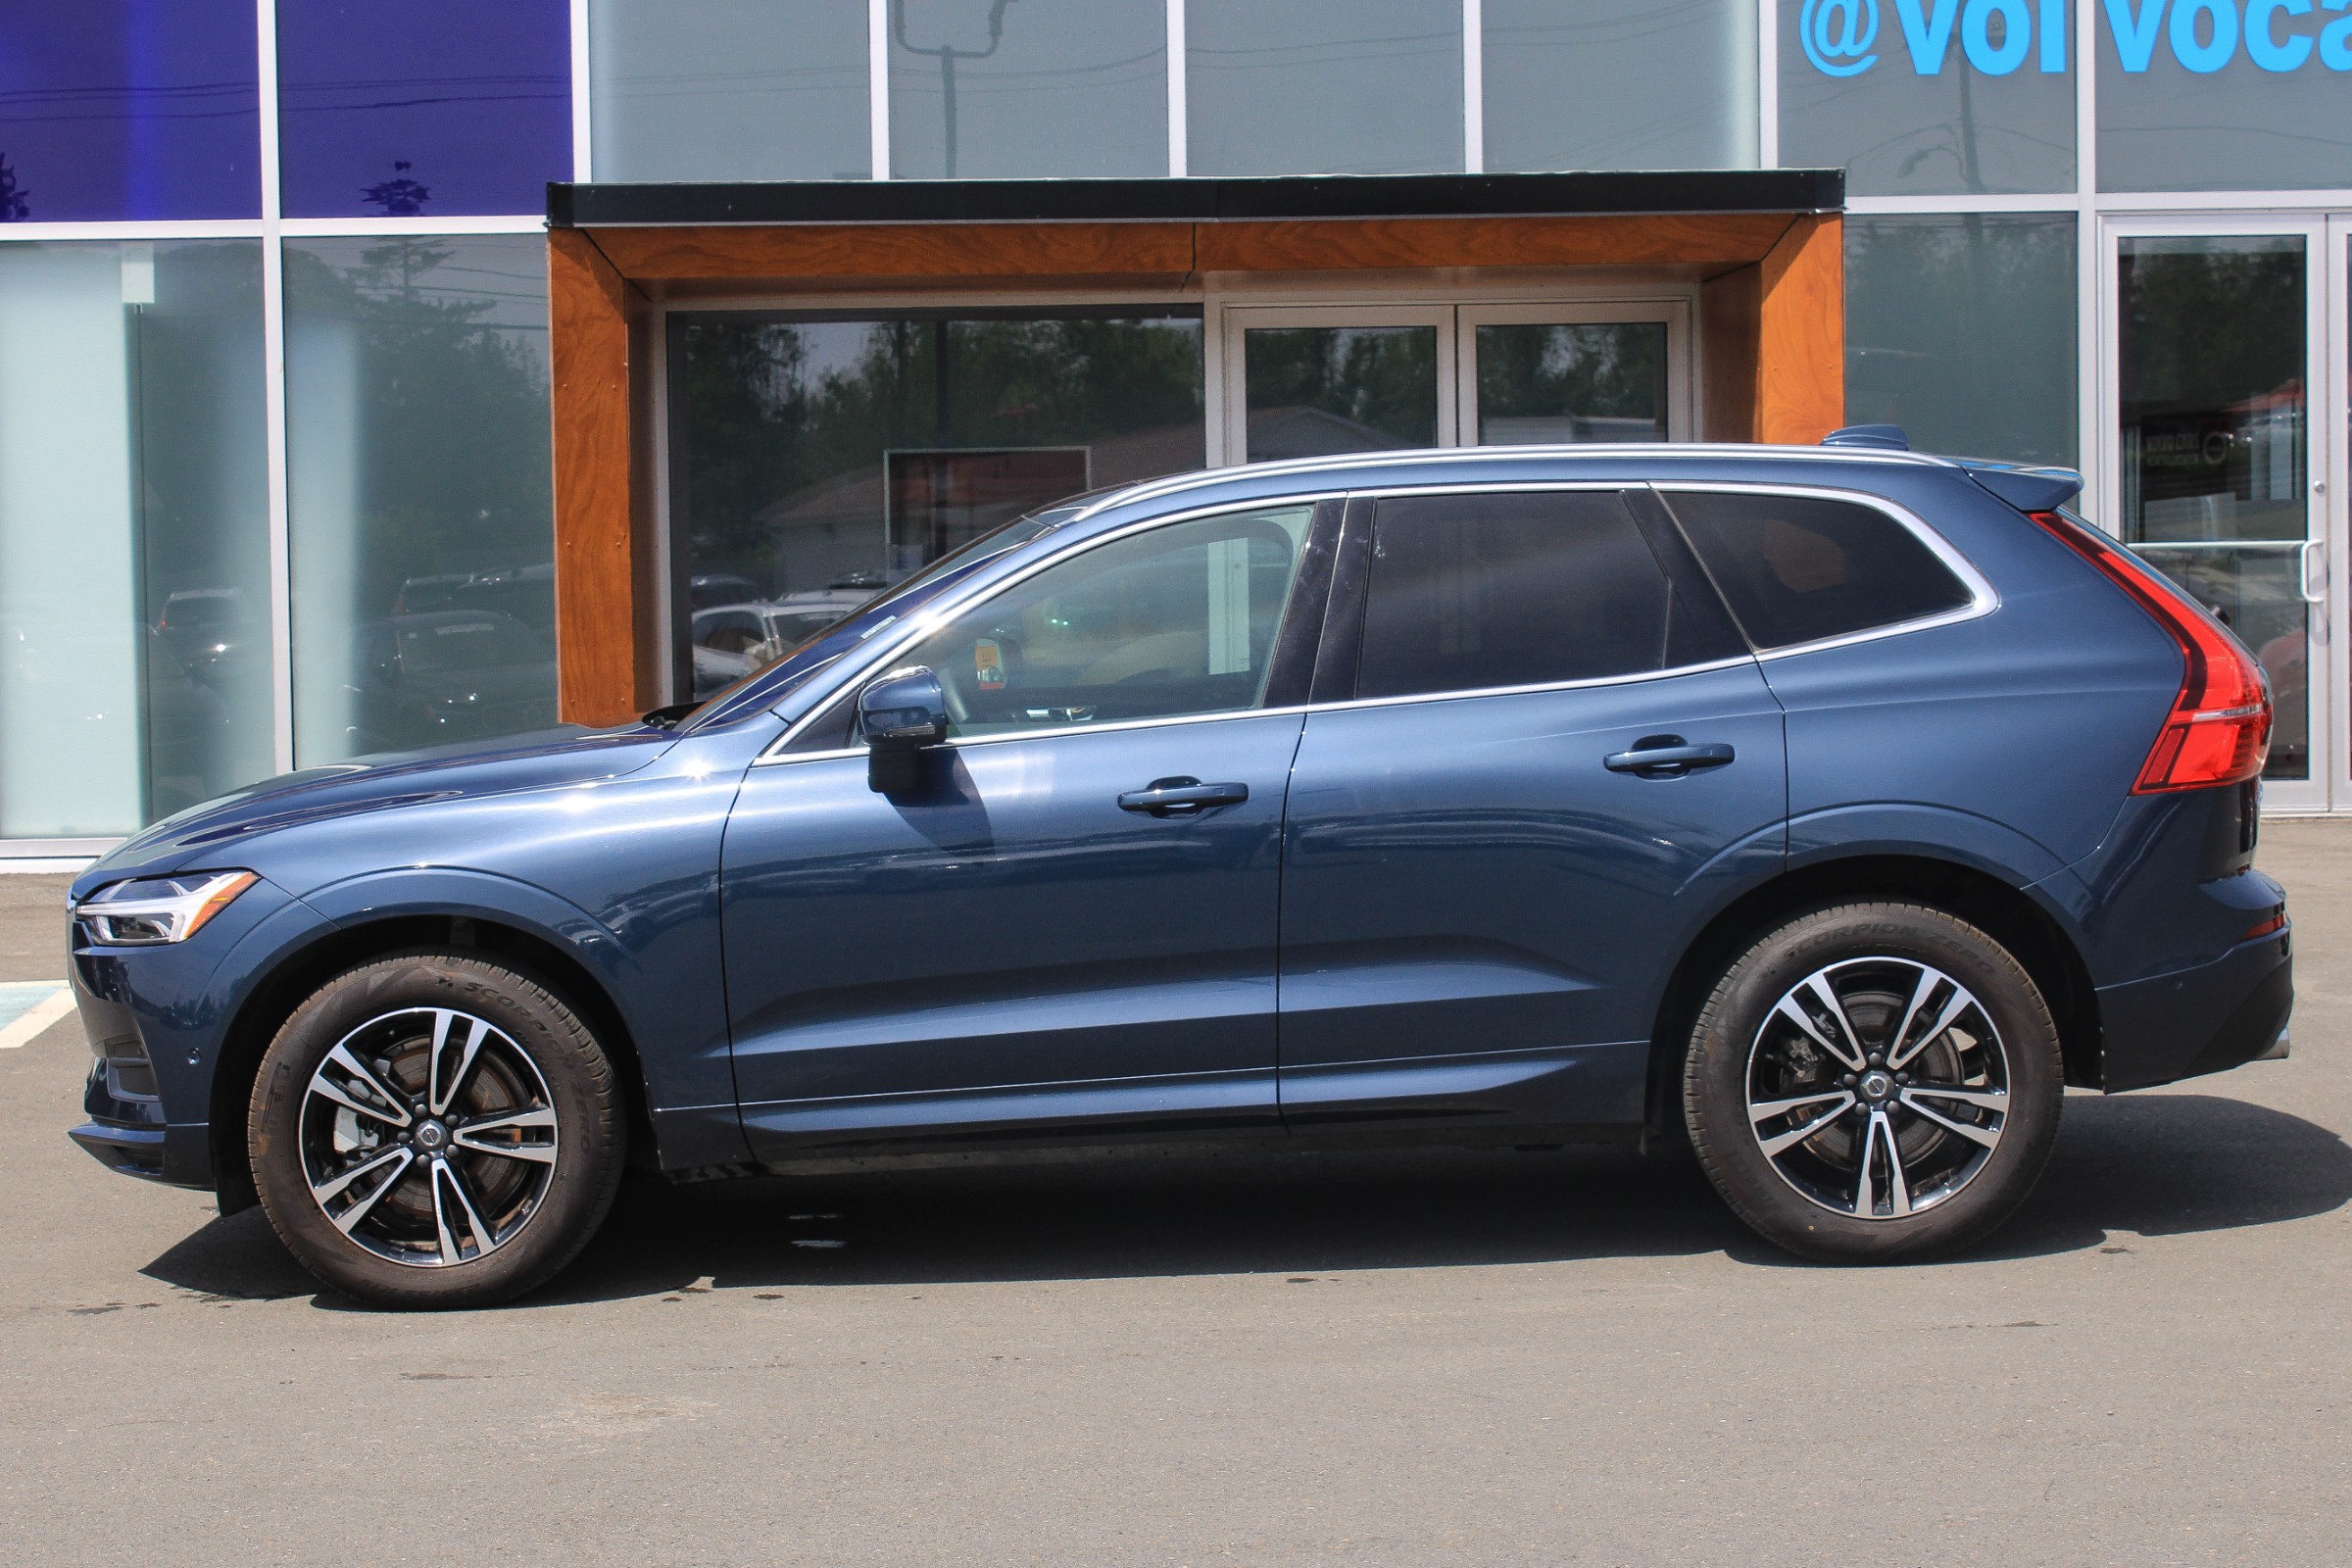 Certified Pre-Owned 2019 Volvo XC60 T6 Momentum With Navigation & AWD